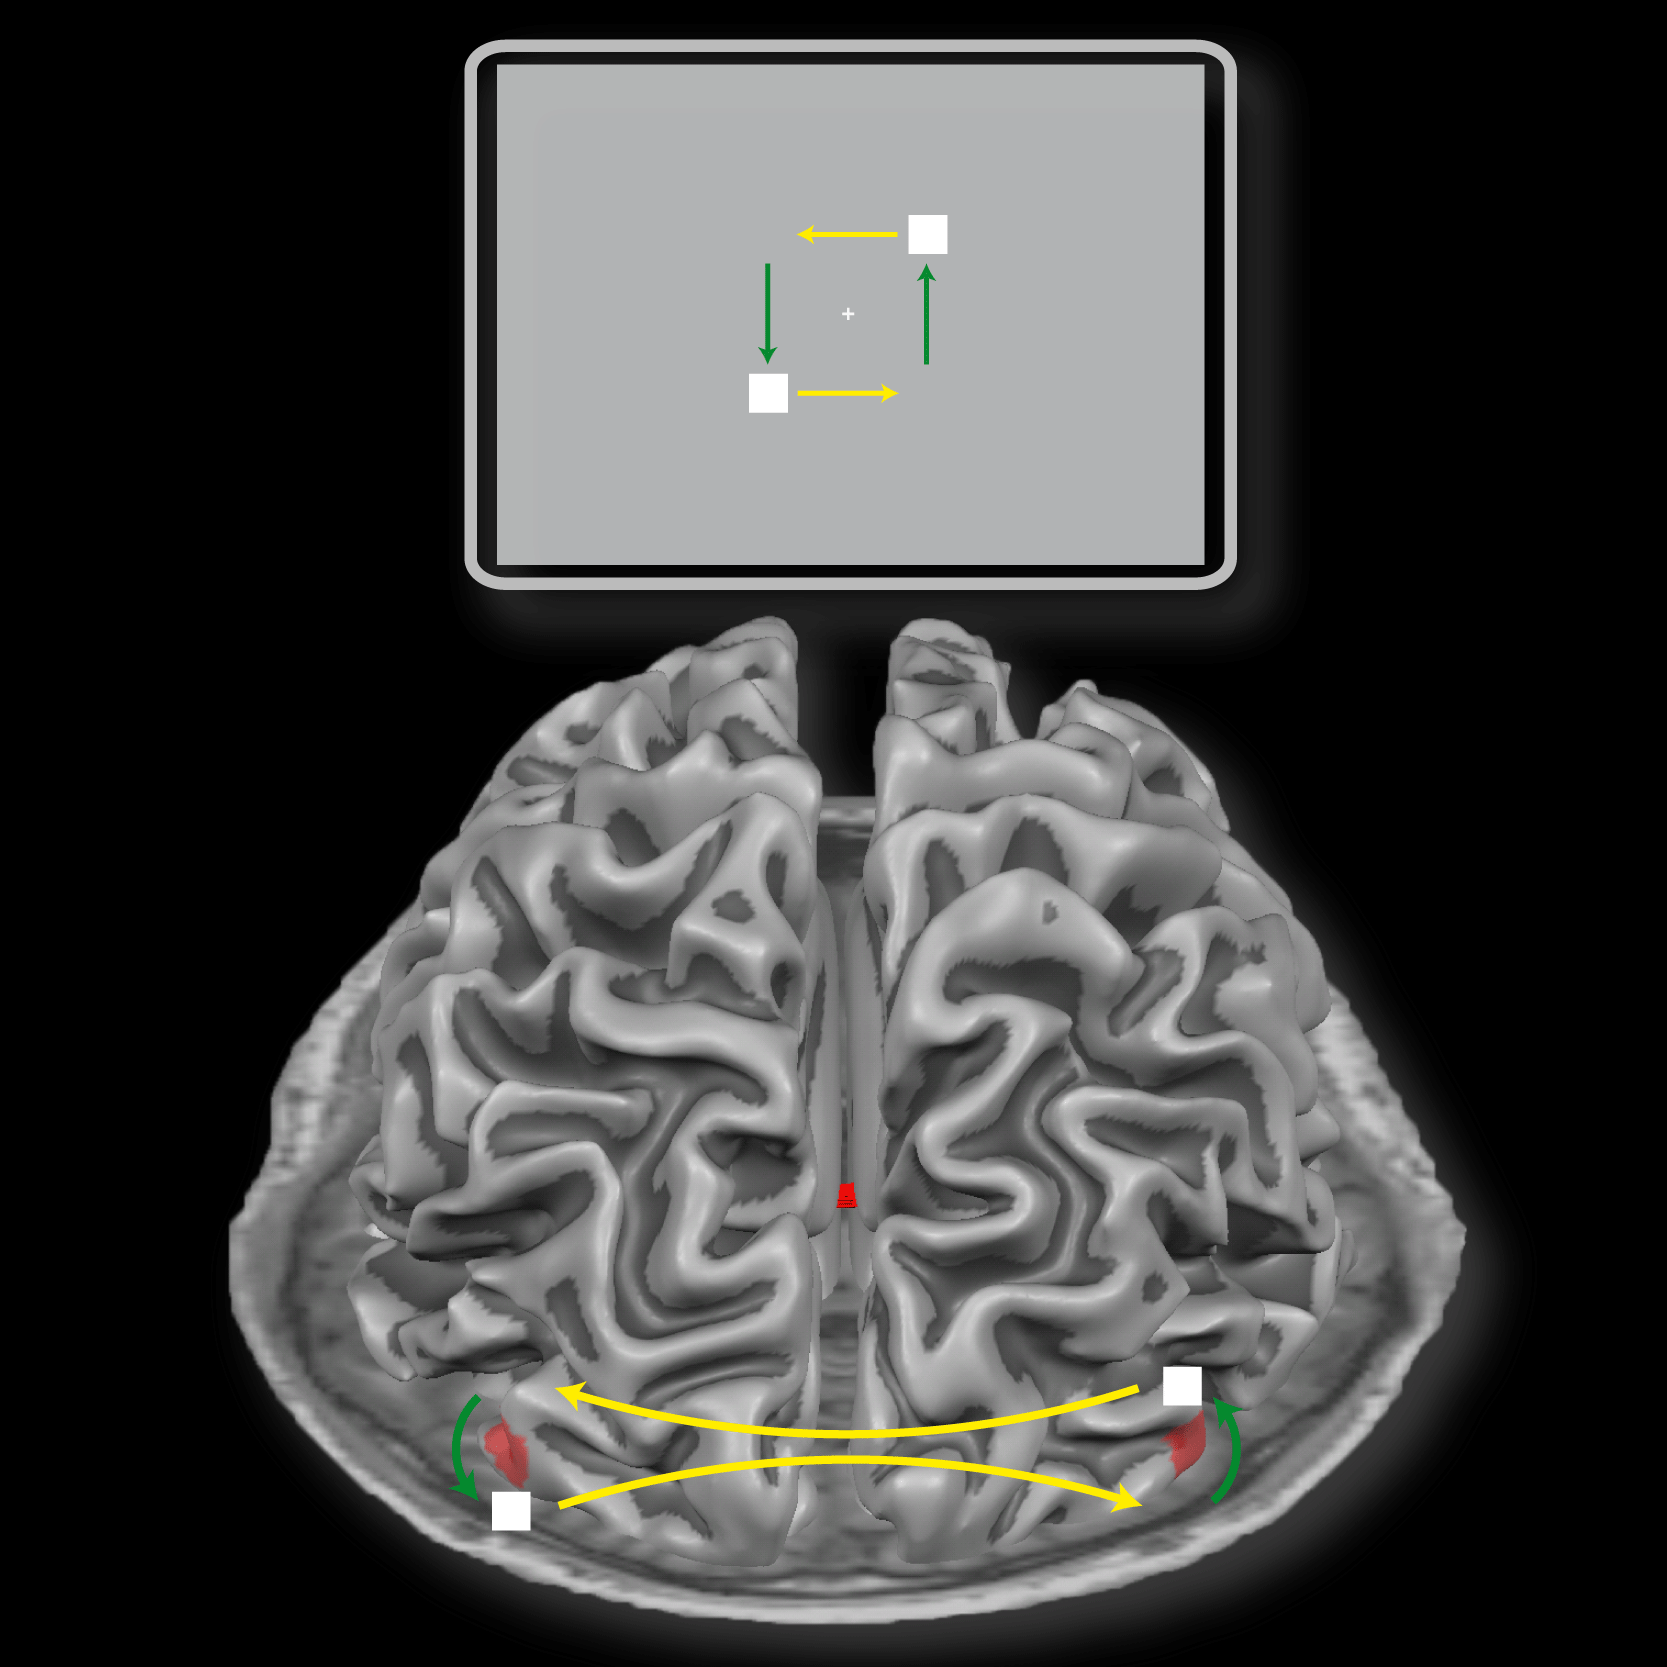 Interhemispheric connections shape subjective experience of bistable motion